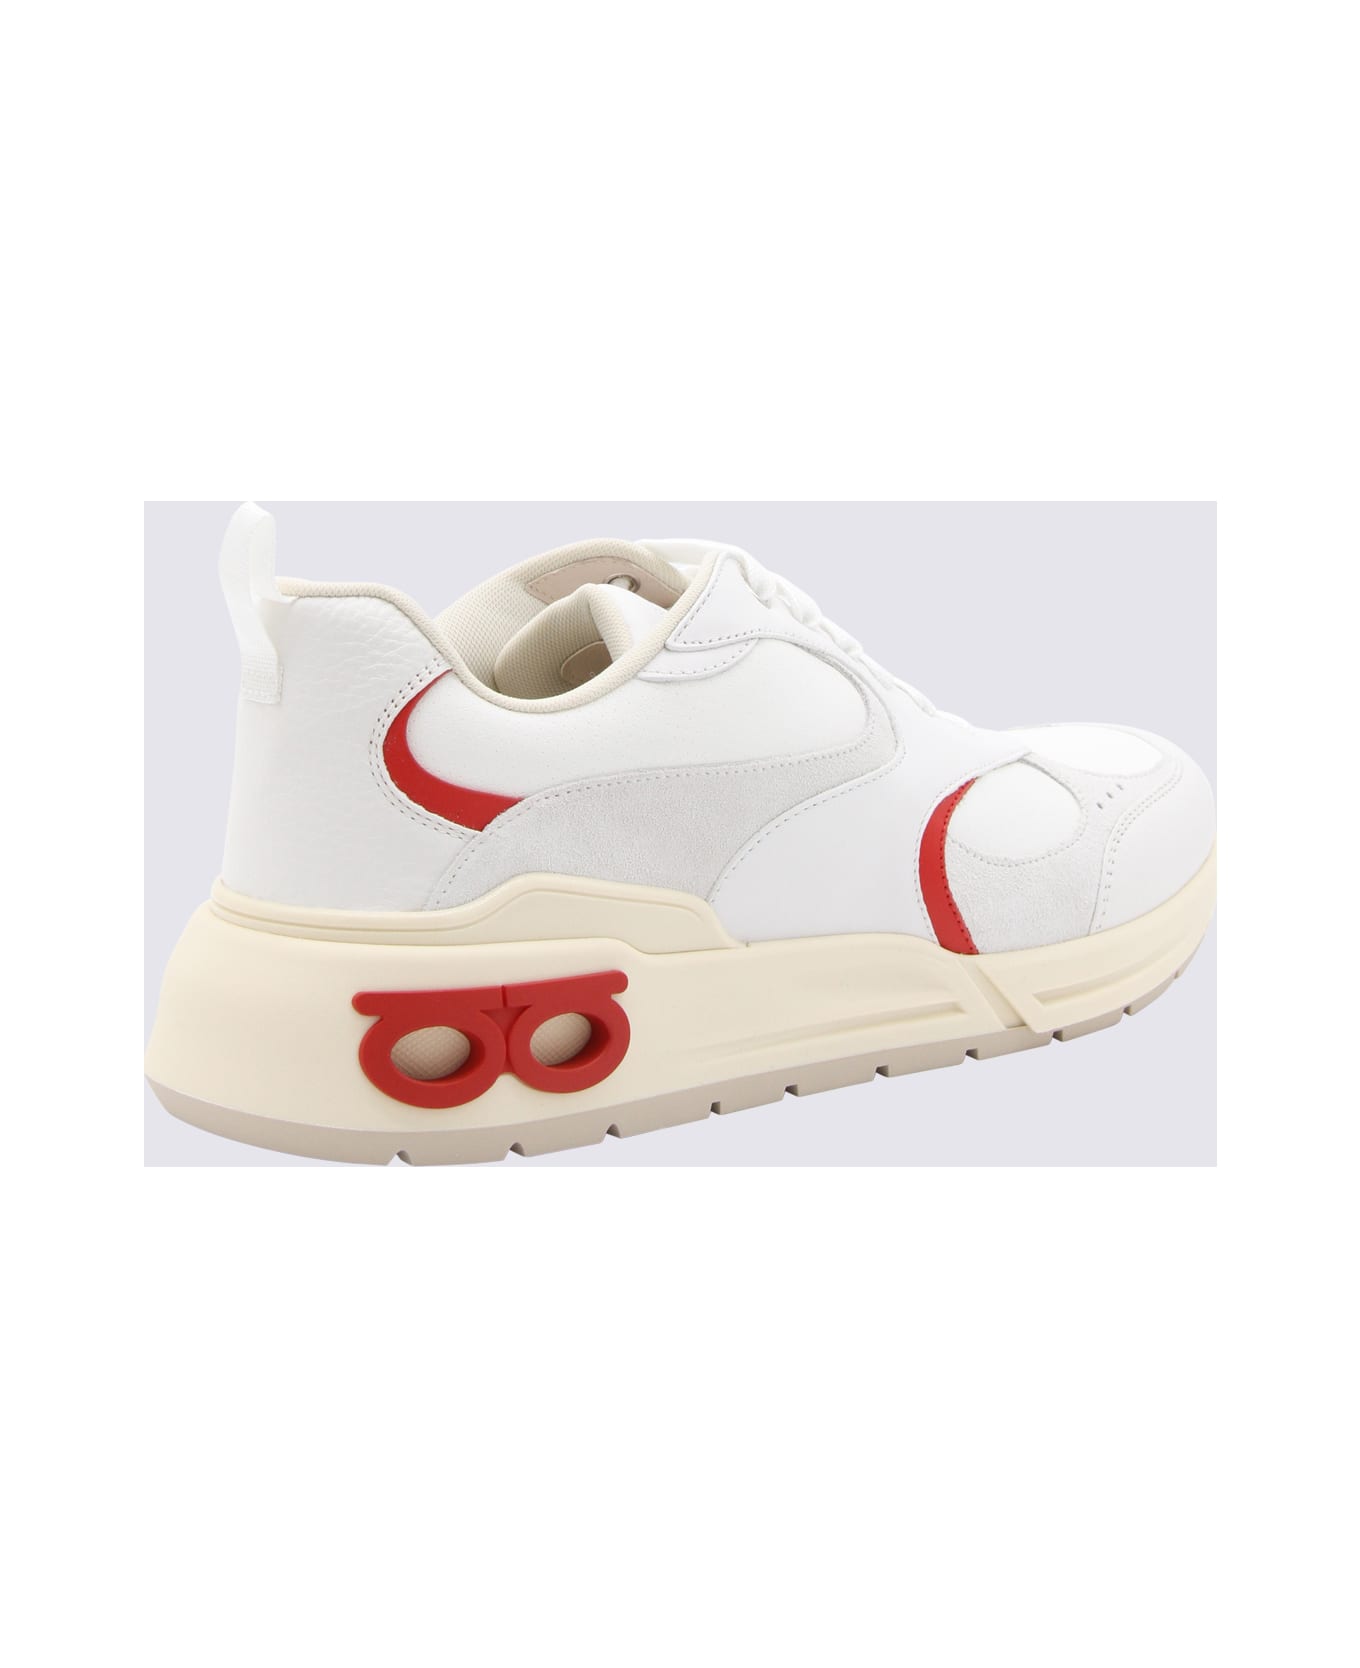 Ferragamo White And Red Leather Sneakers - White